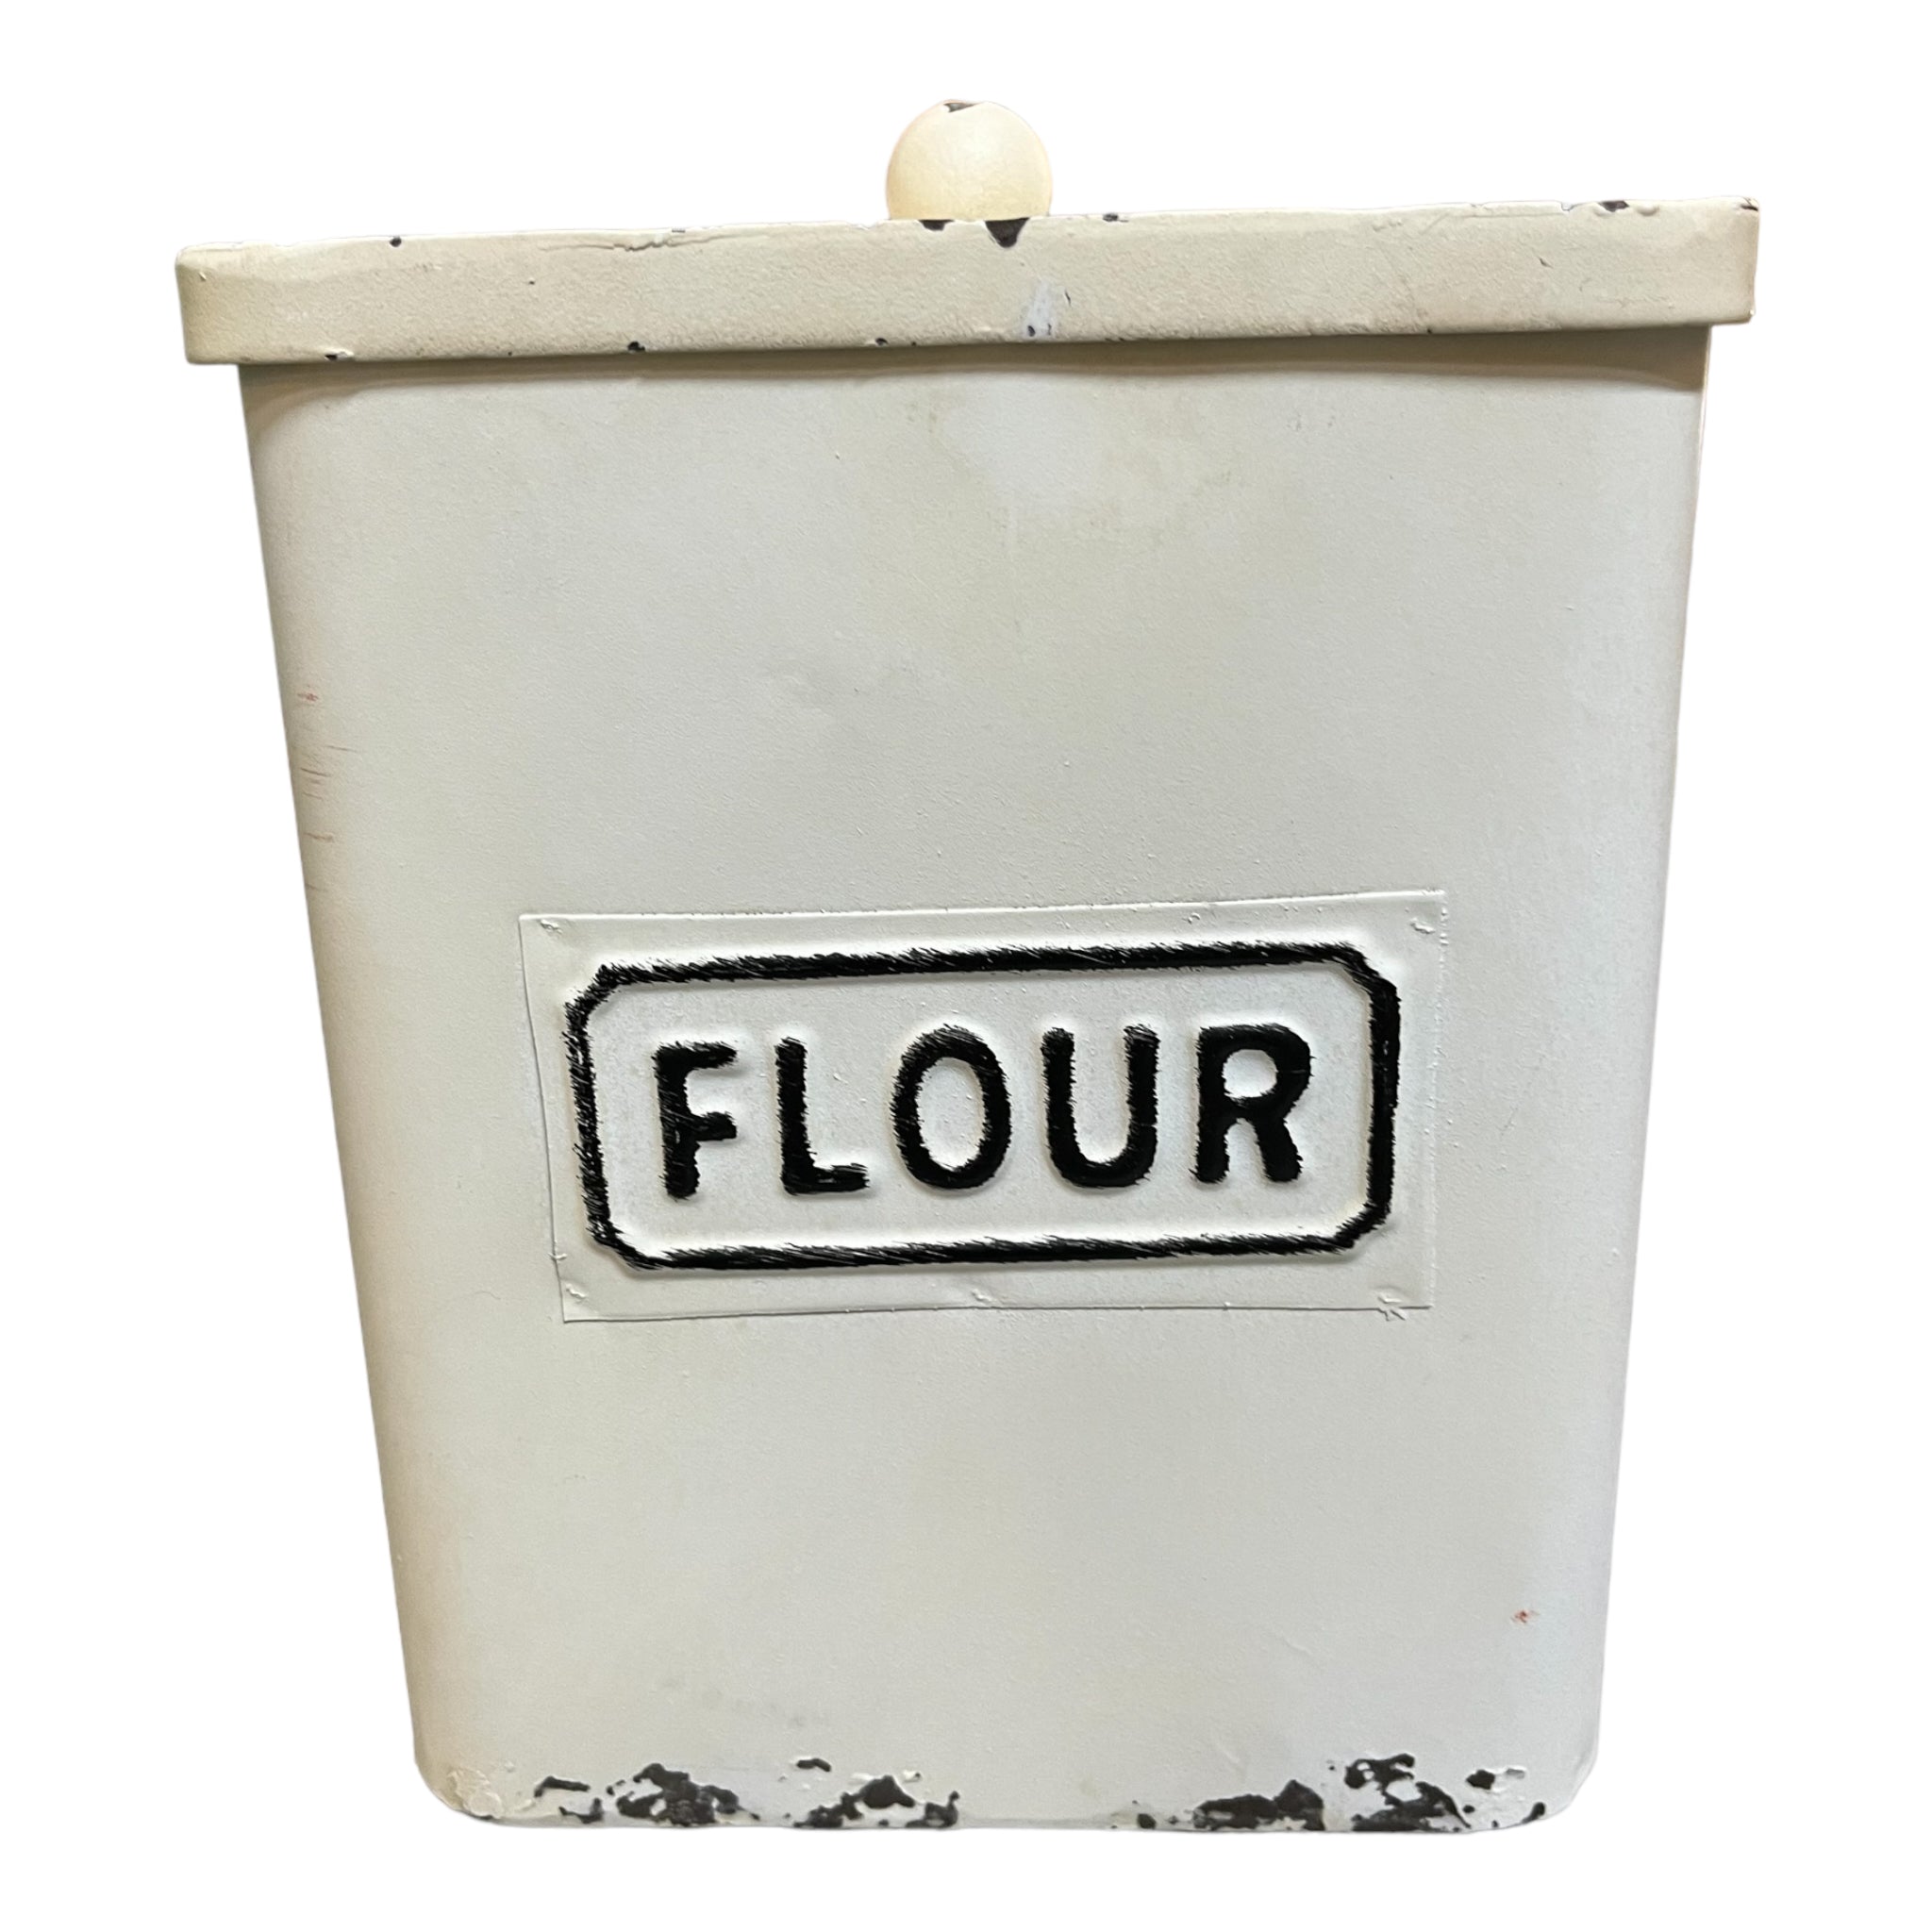 Metal Canister “Flour”